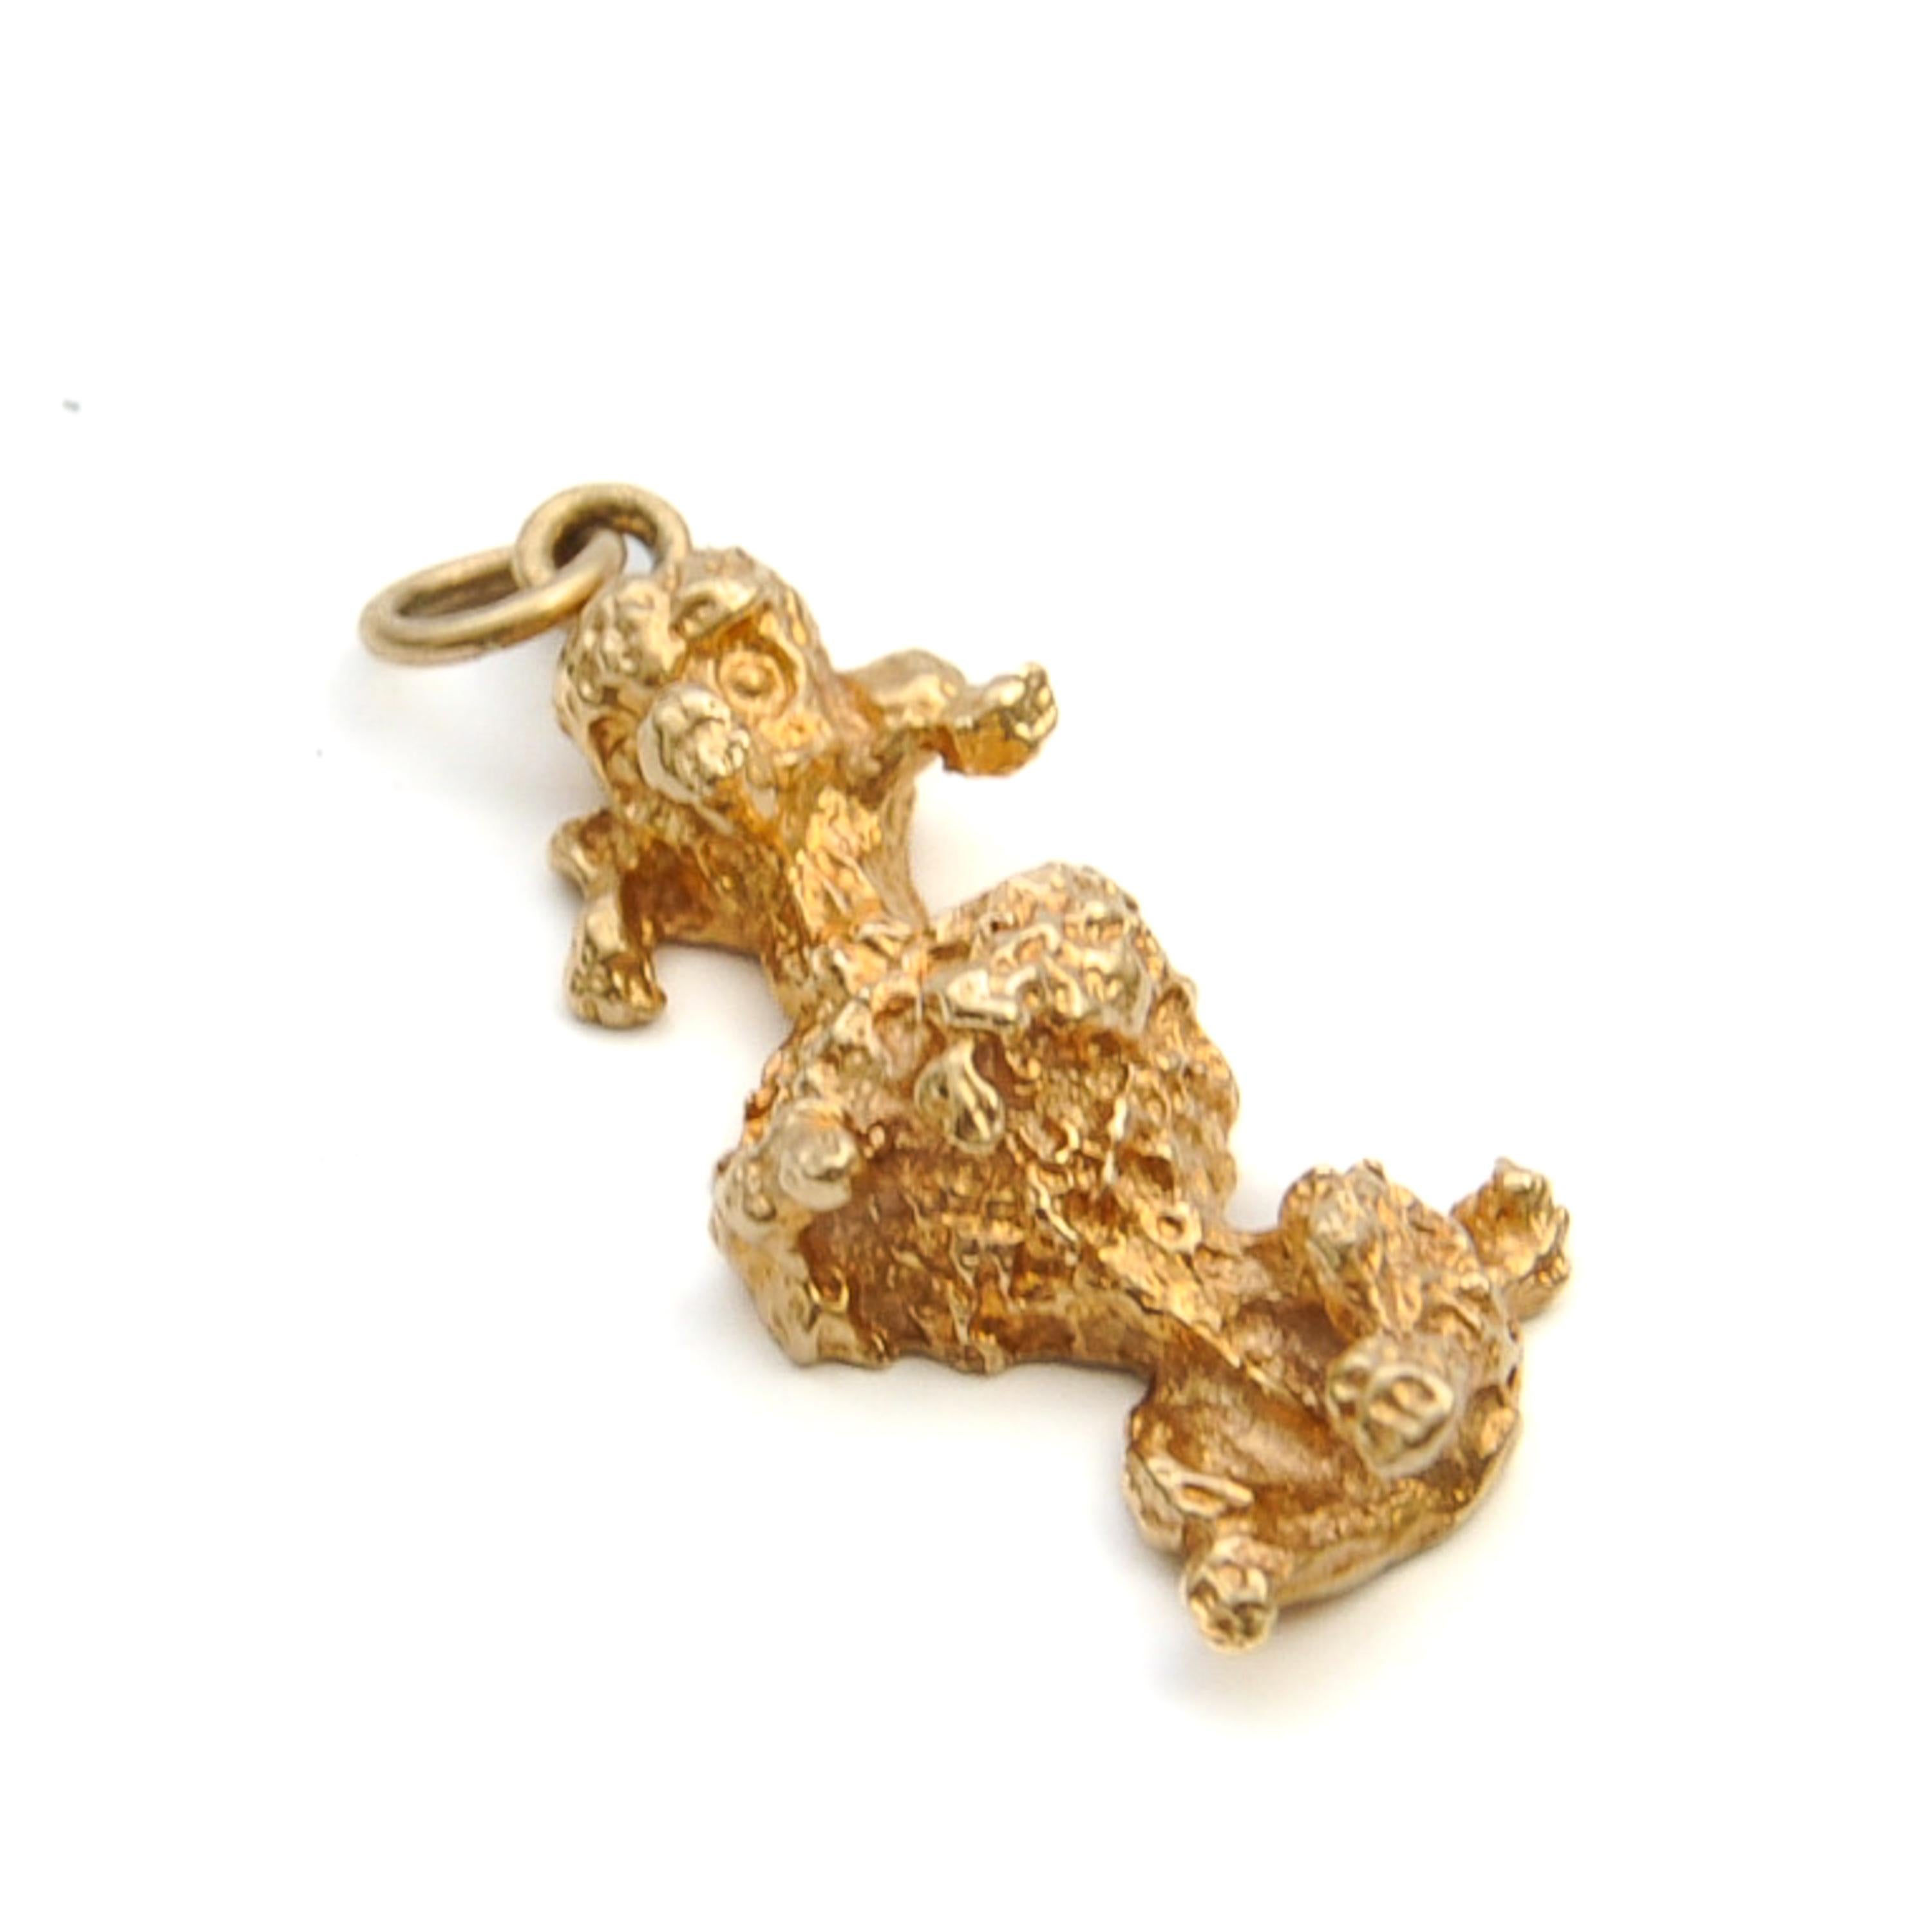 Vintage 9K Gold Poodle Dog Charm Pendant In Good Condition For Sale In Rotterdam, NL